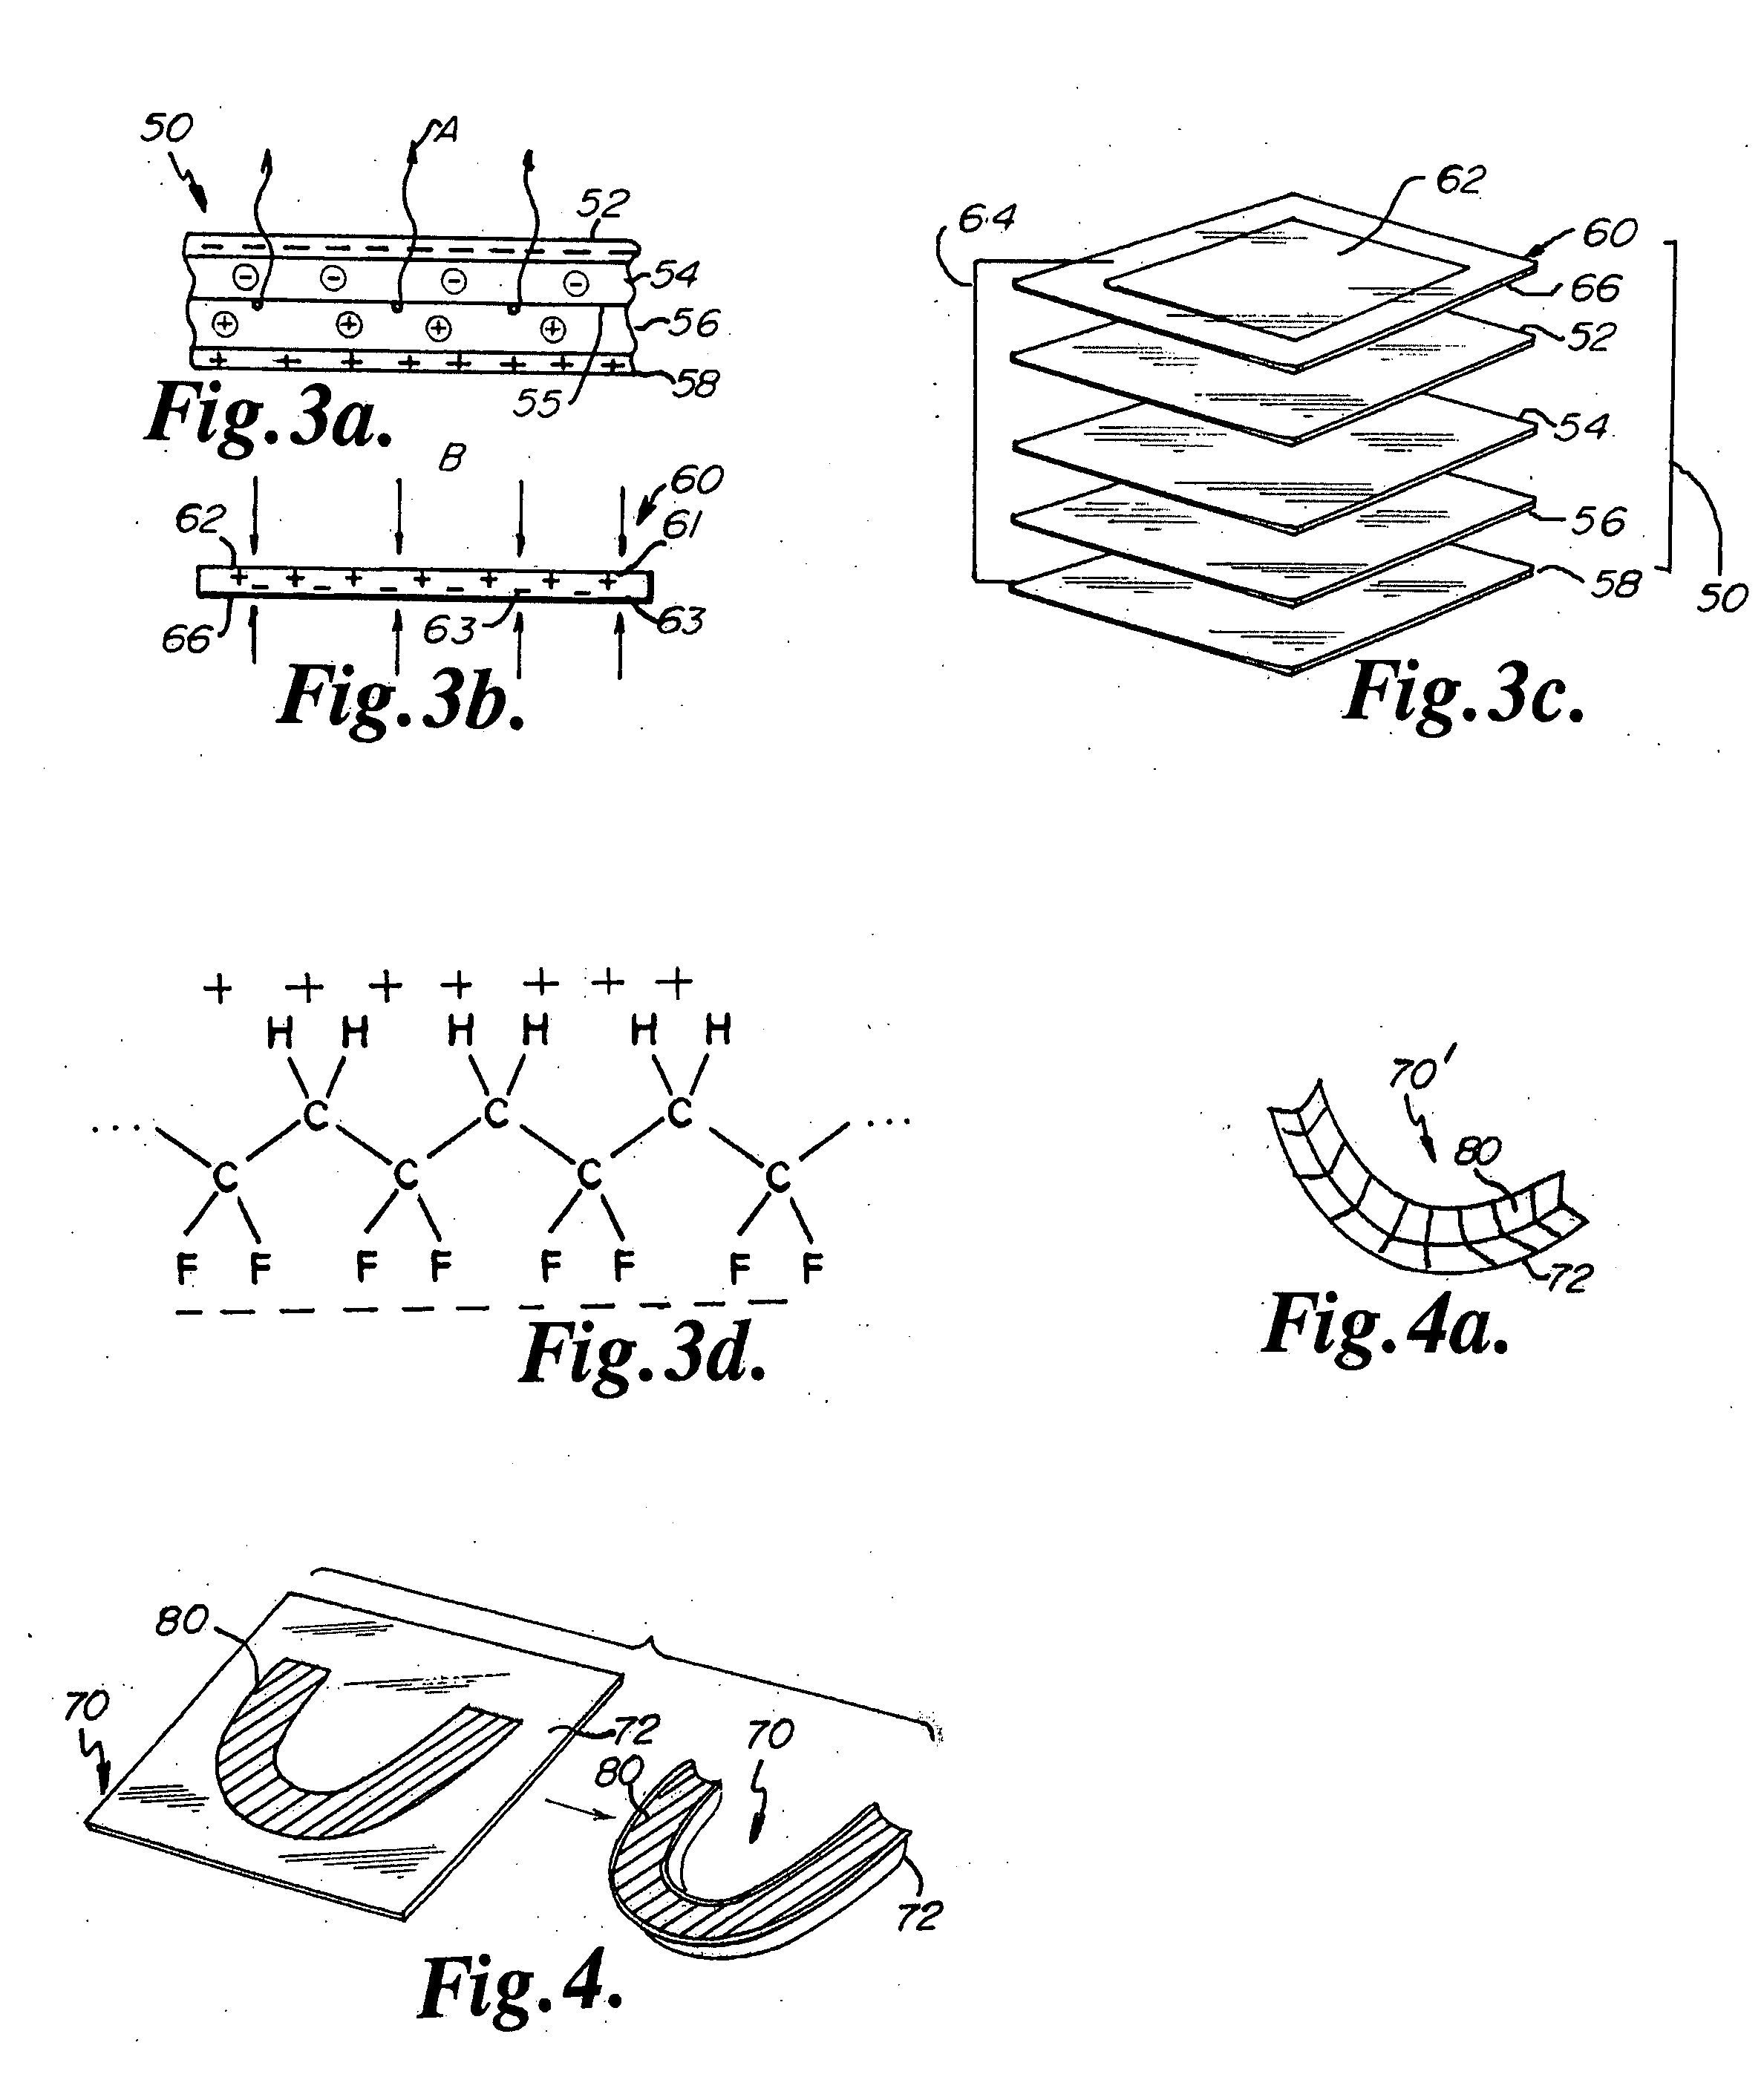 Device and method for improving oral health